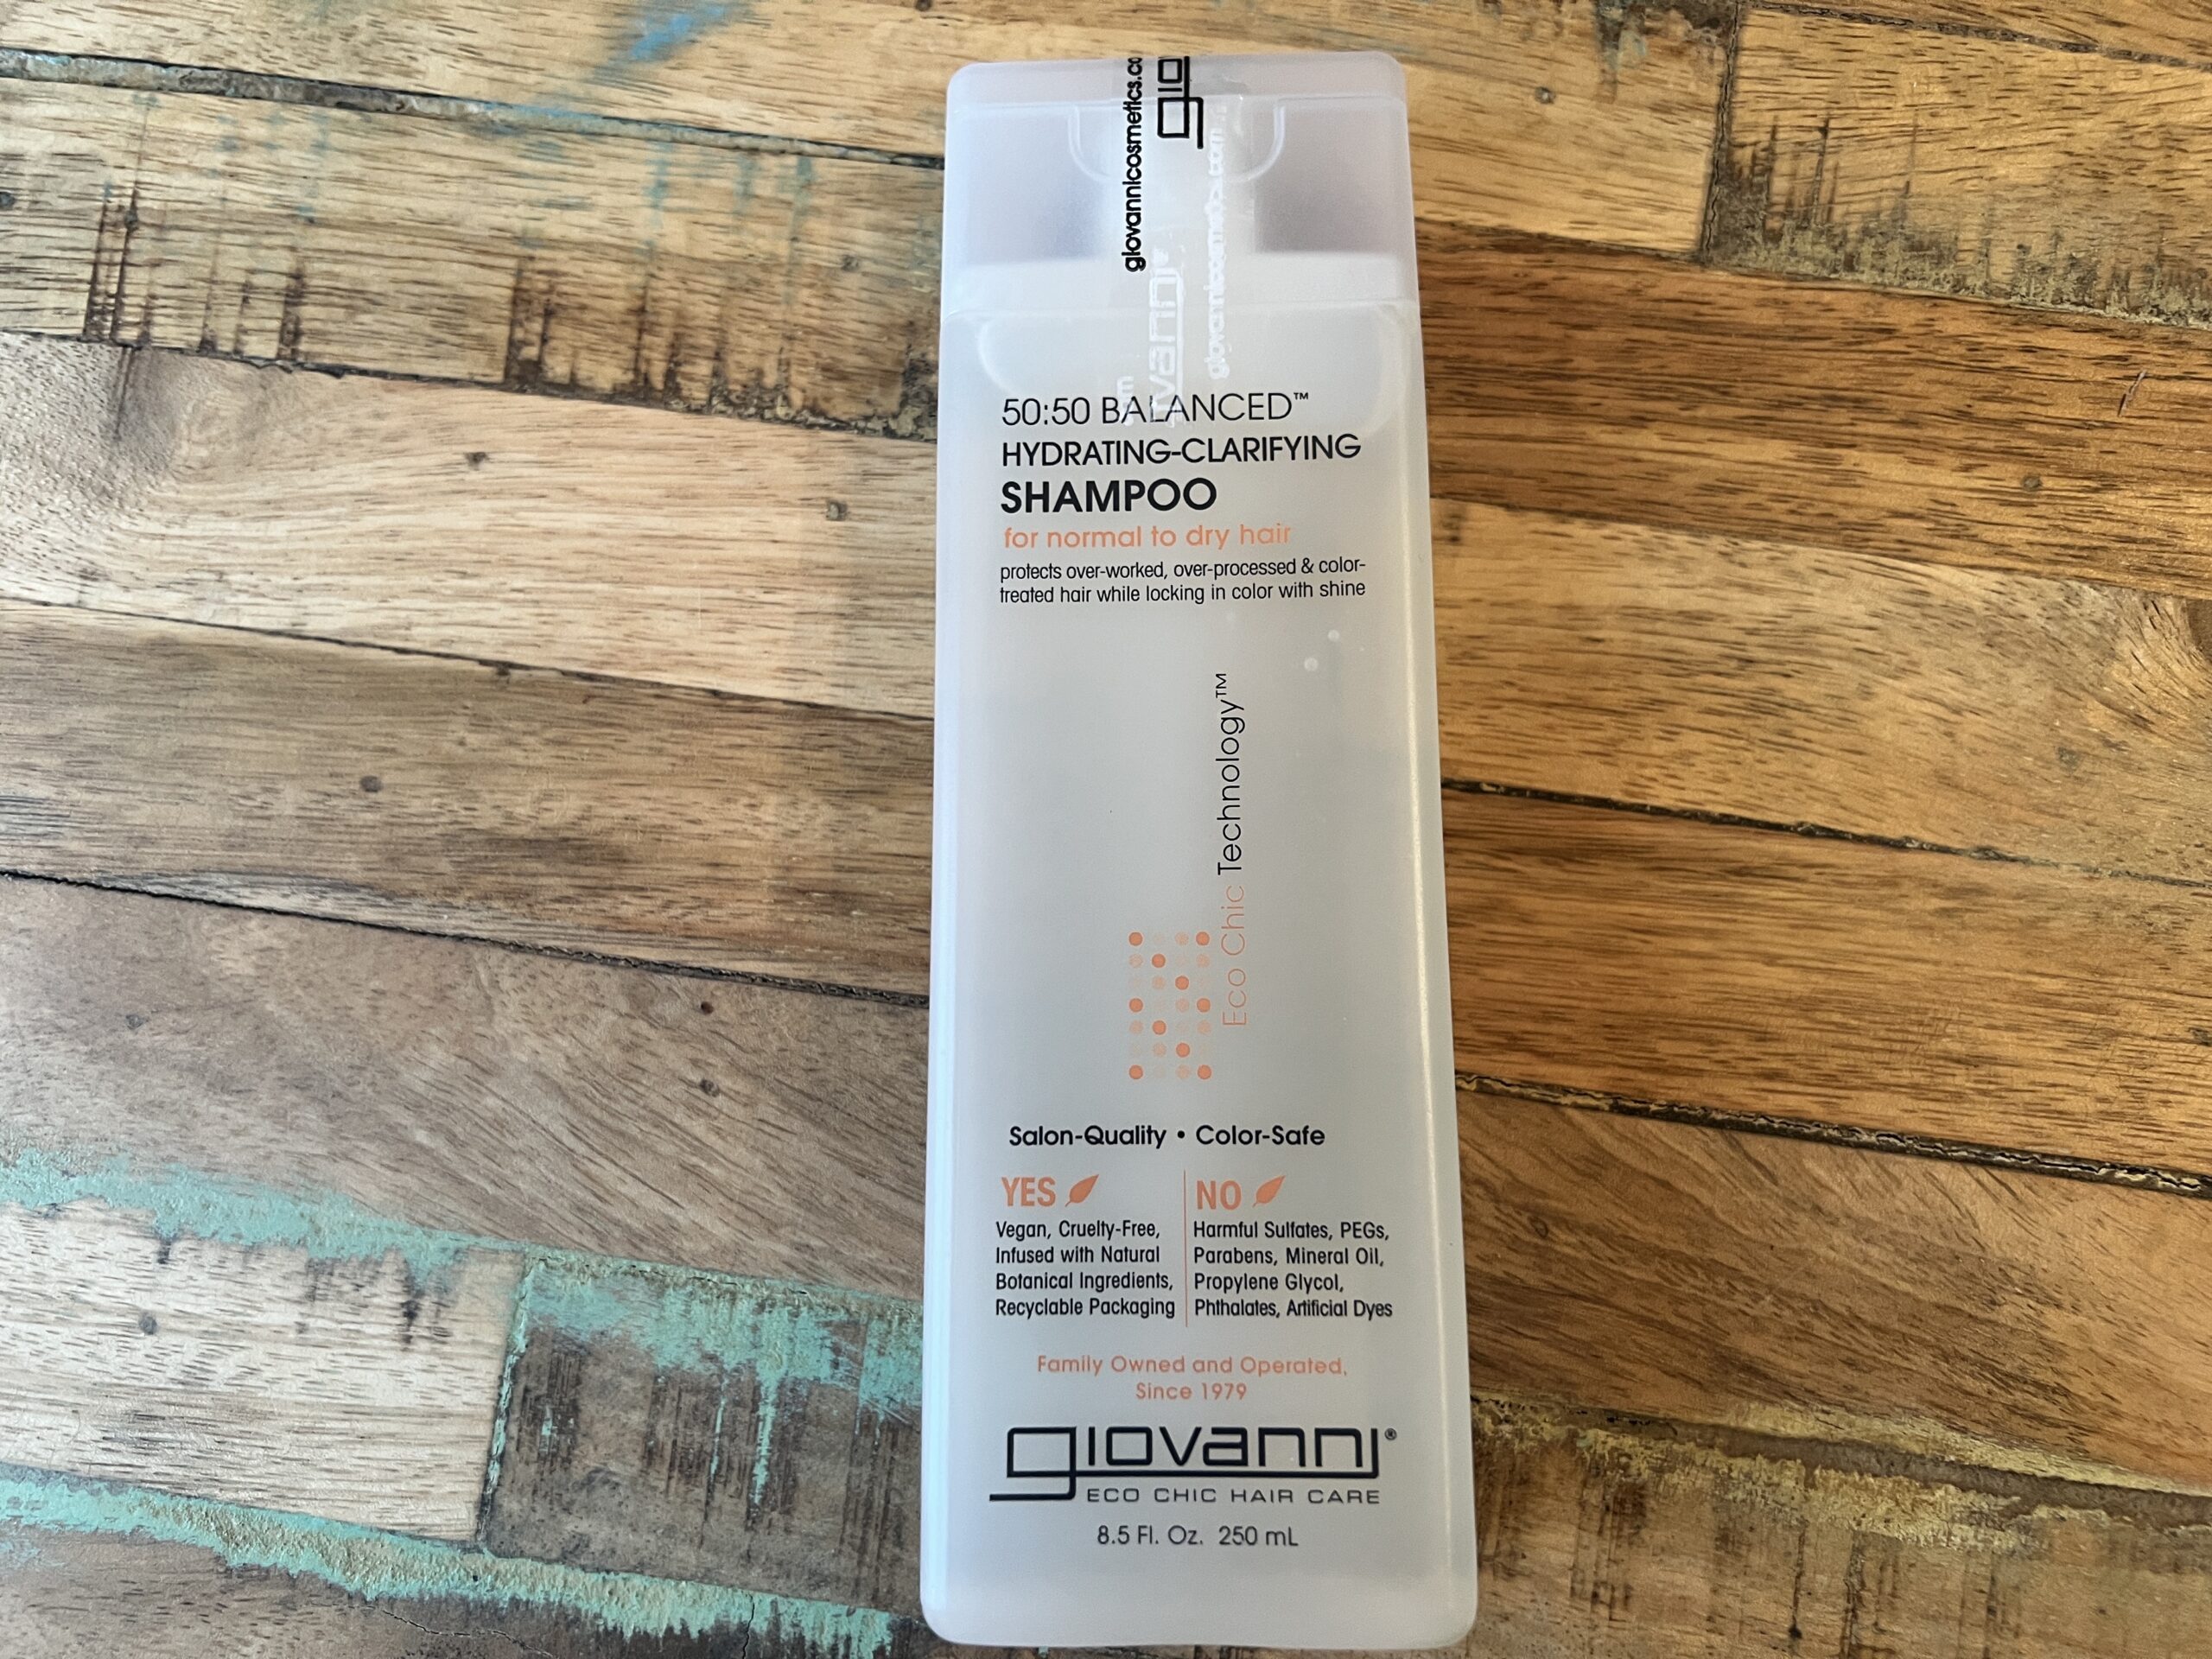 50:50 Balanced Hydrating-Clarifying Shampoo for normal to dry hair protects over-worked, over-processed, and color-treated hair while locking in color with shine.